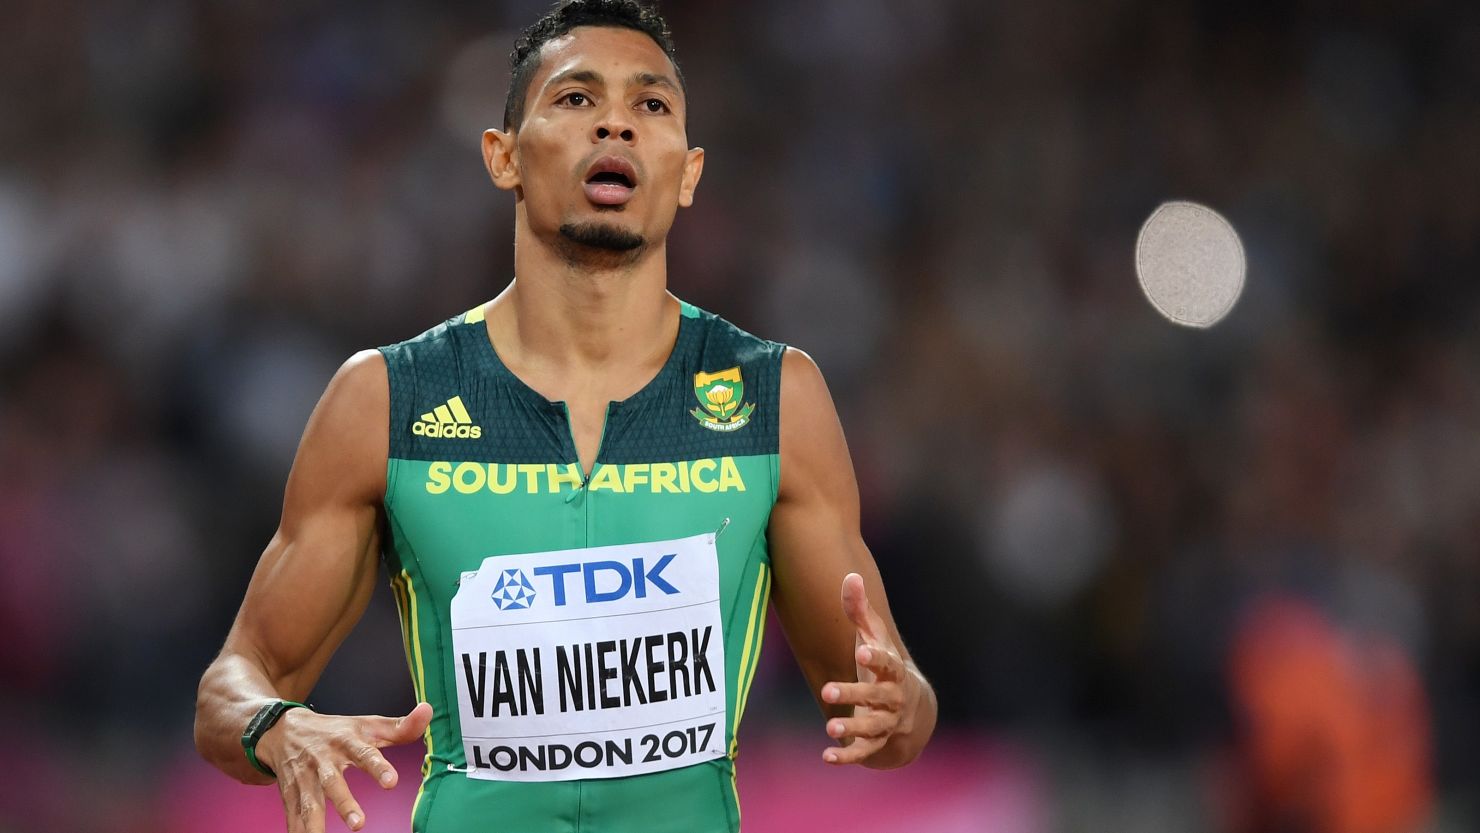 Wayde van Niekerk won the silver medal in the 200m at the World Athletics Championships